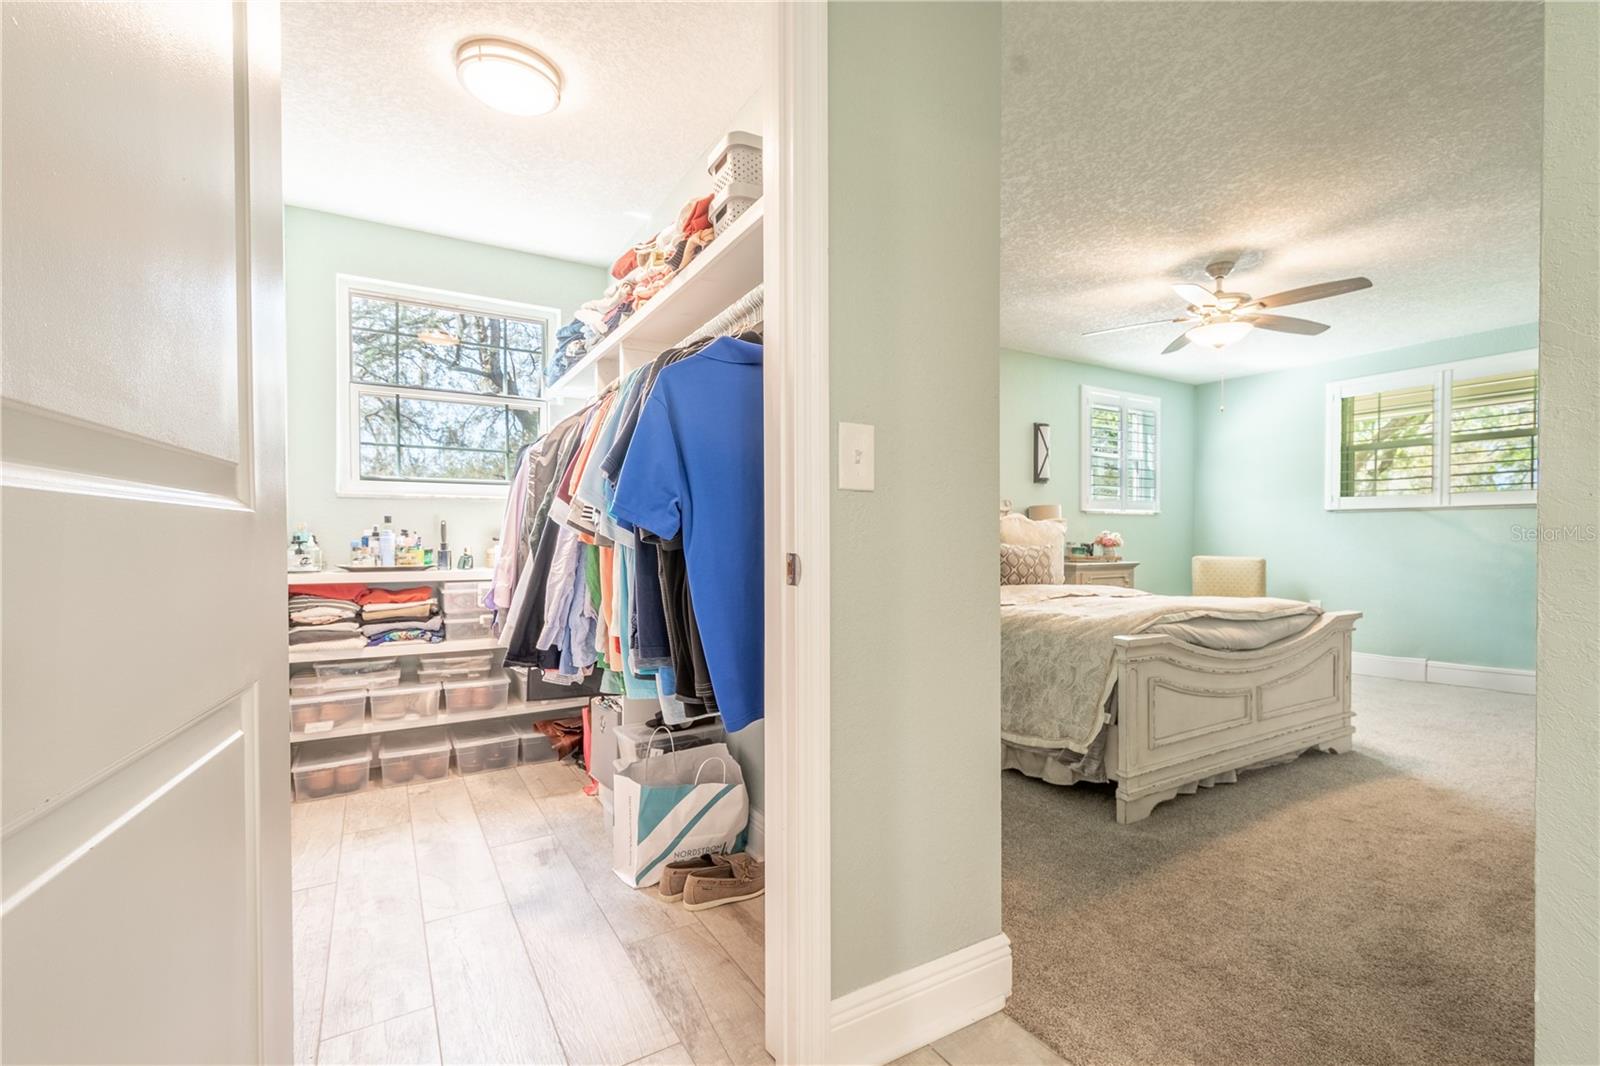 The upstairs ensuite features a large walk in closet.